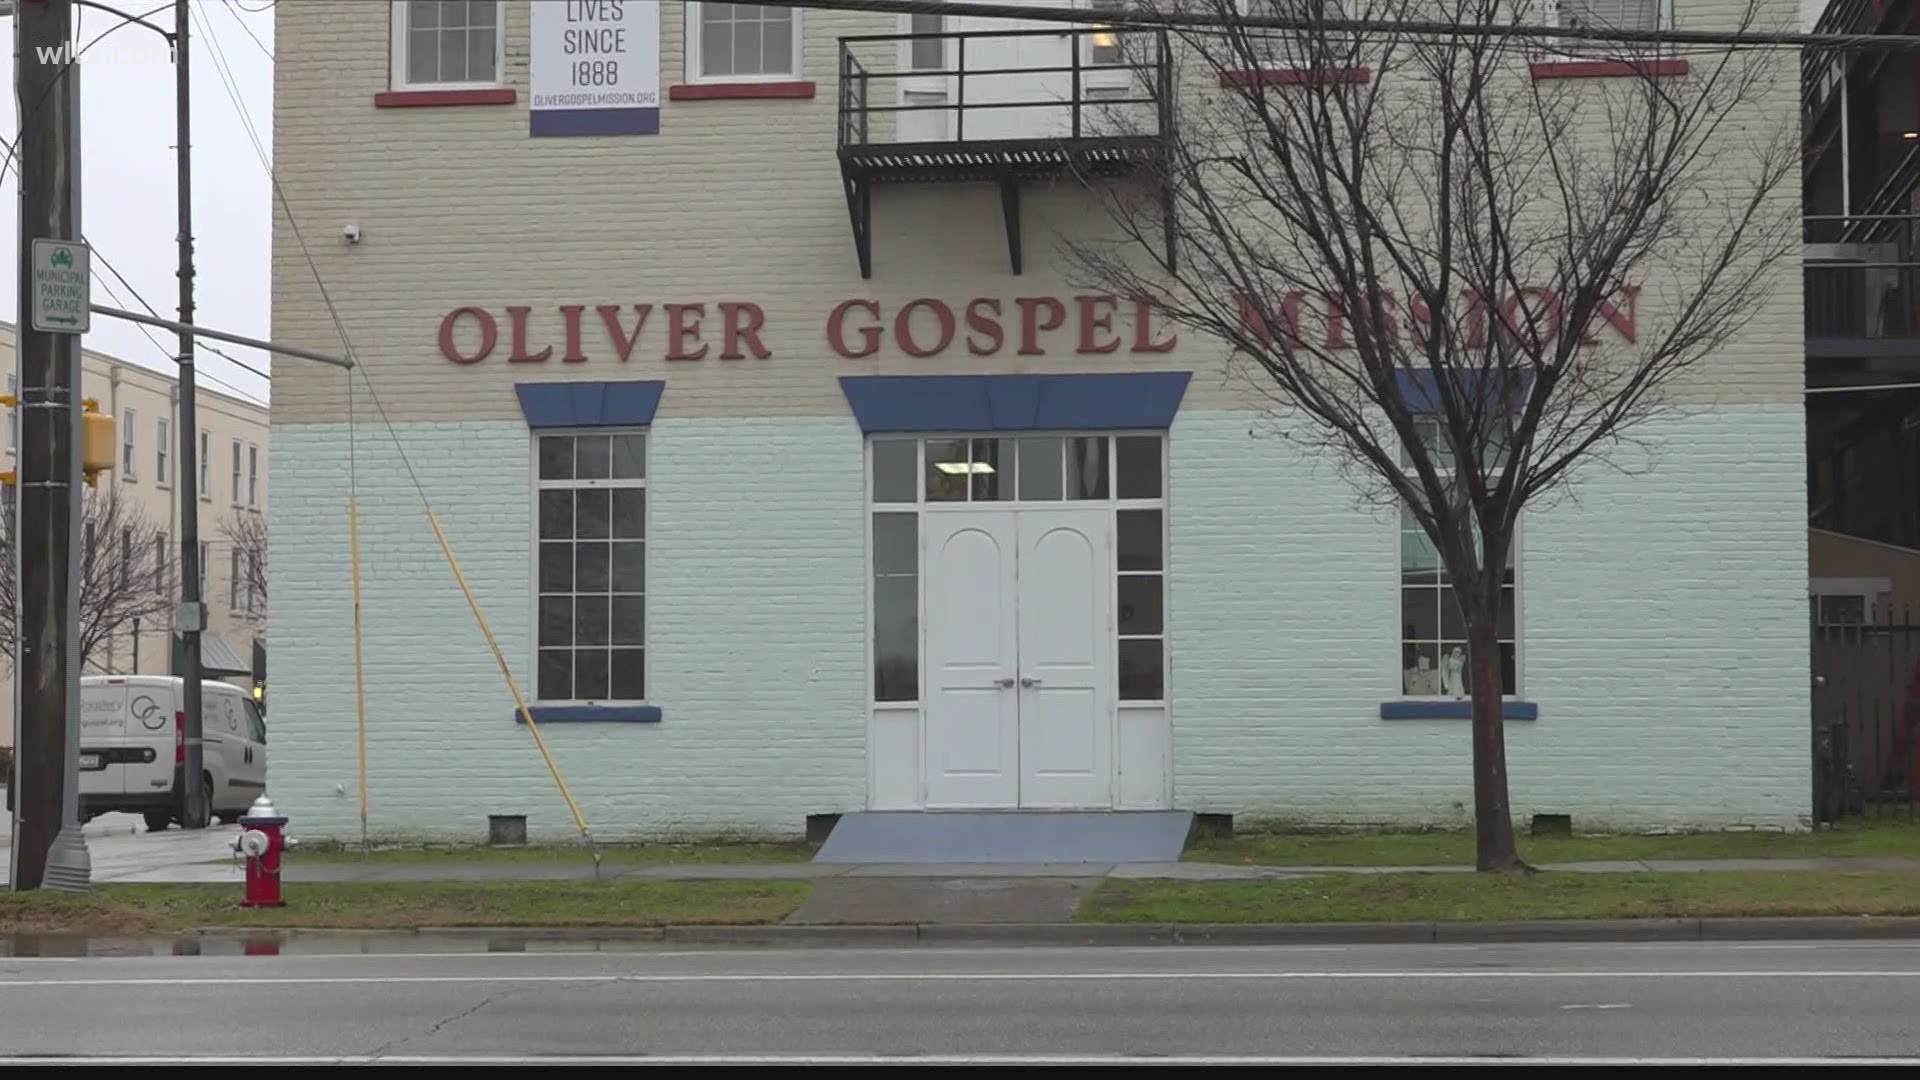 Because of positive COVID cases, the emergency shelter section of Oliver Gospel Mission has had to temporarily close.